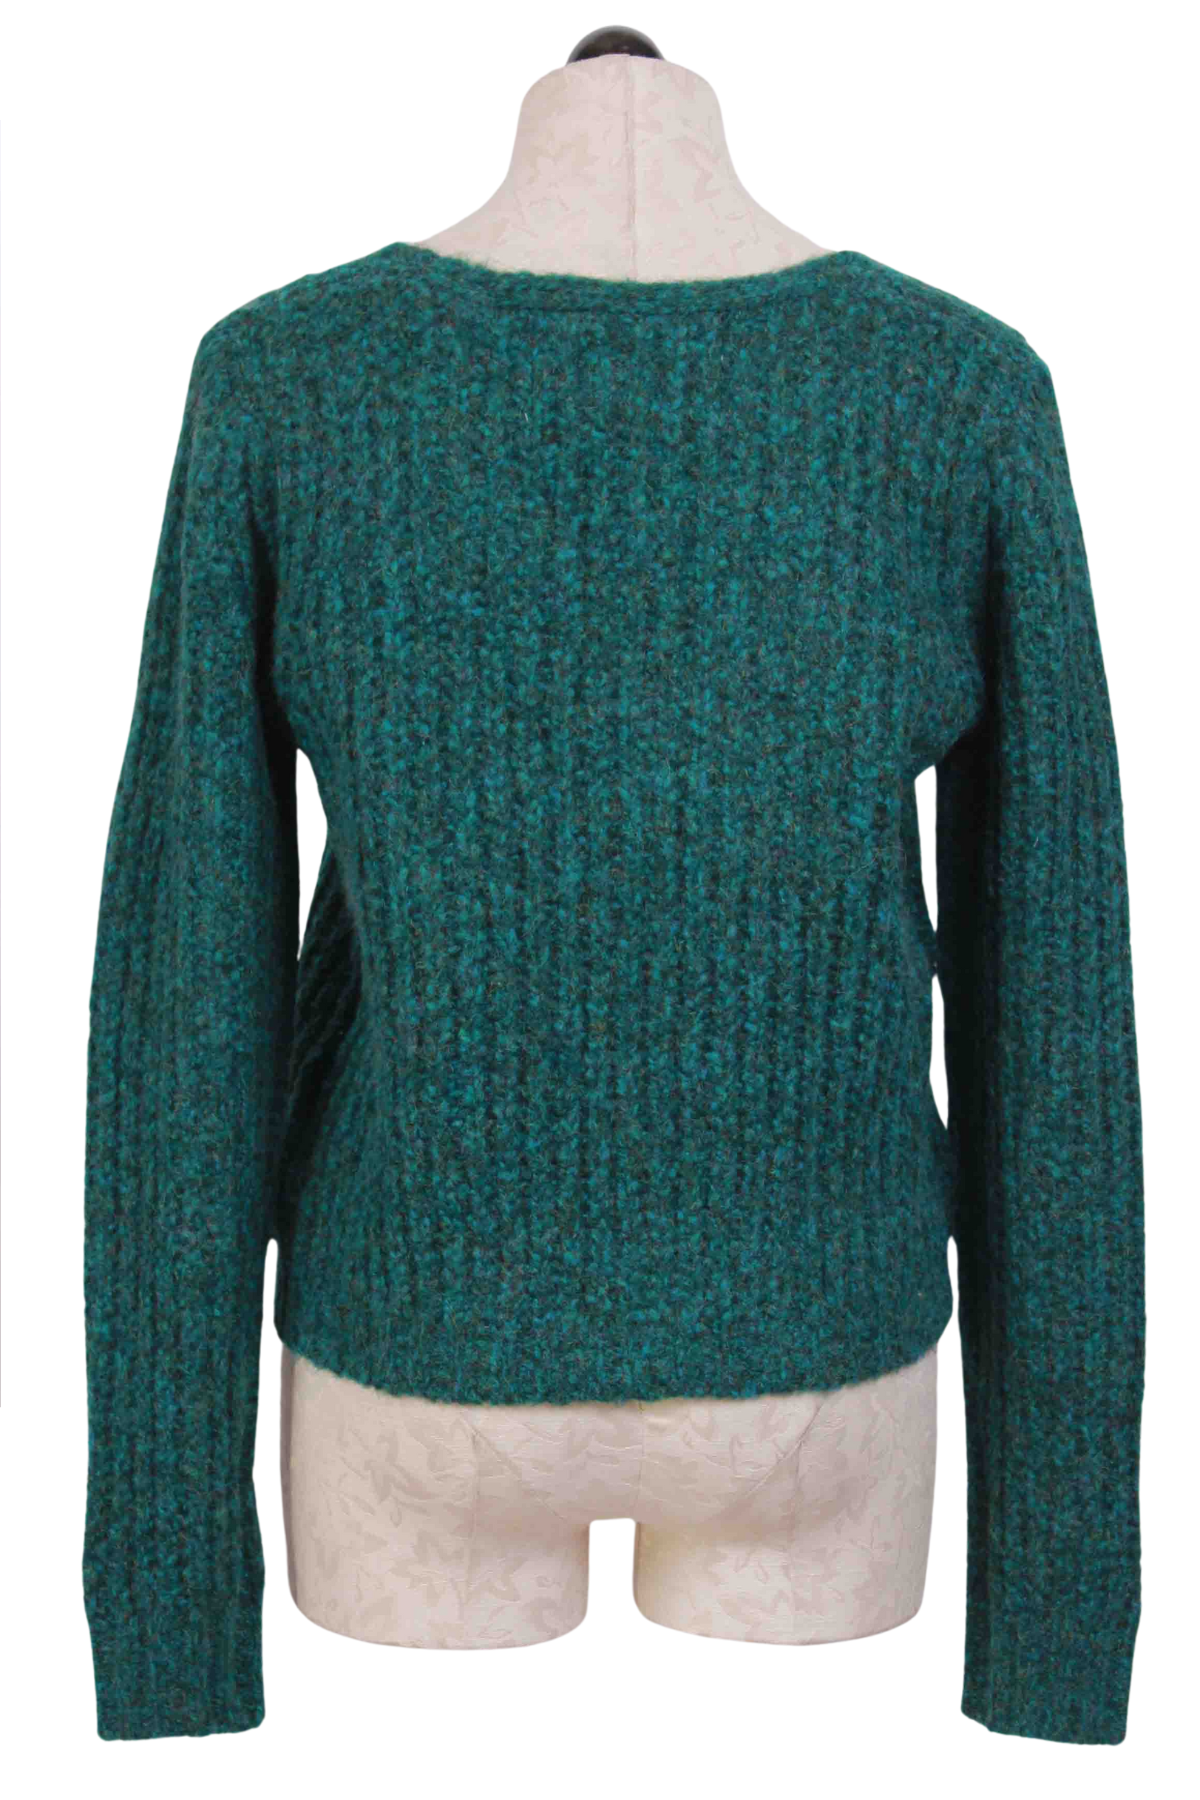 back view of Green V Neck Cable Knit Cardigan by Compania Fantastica